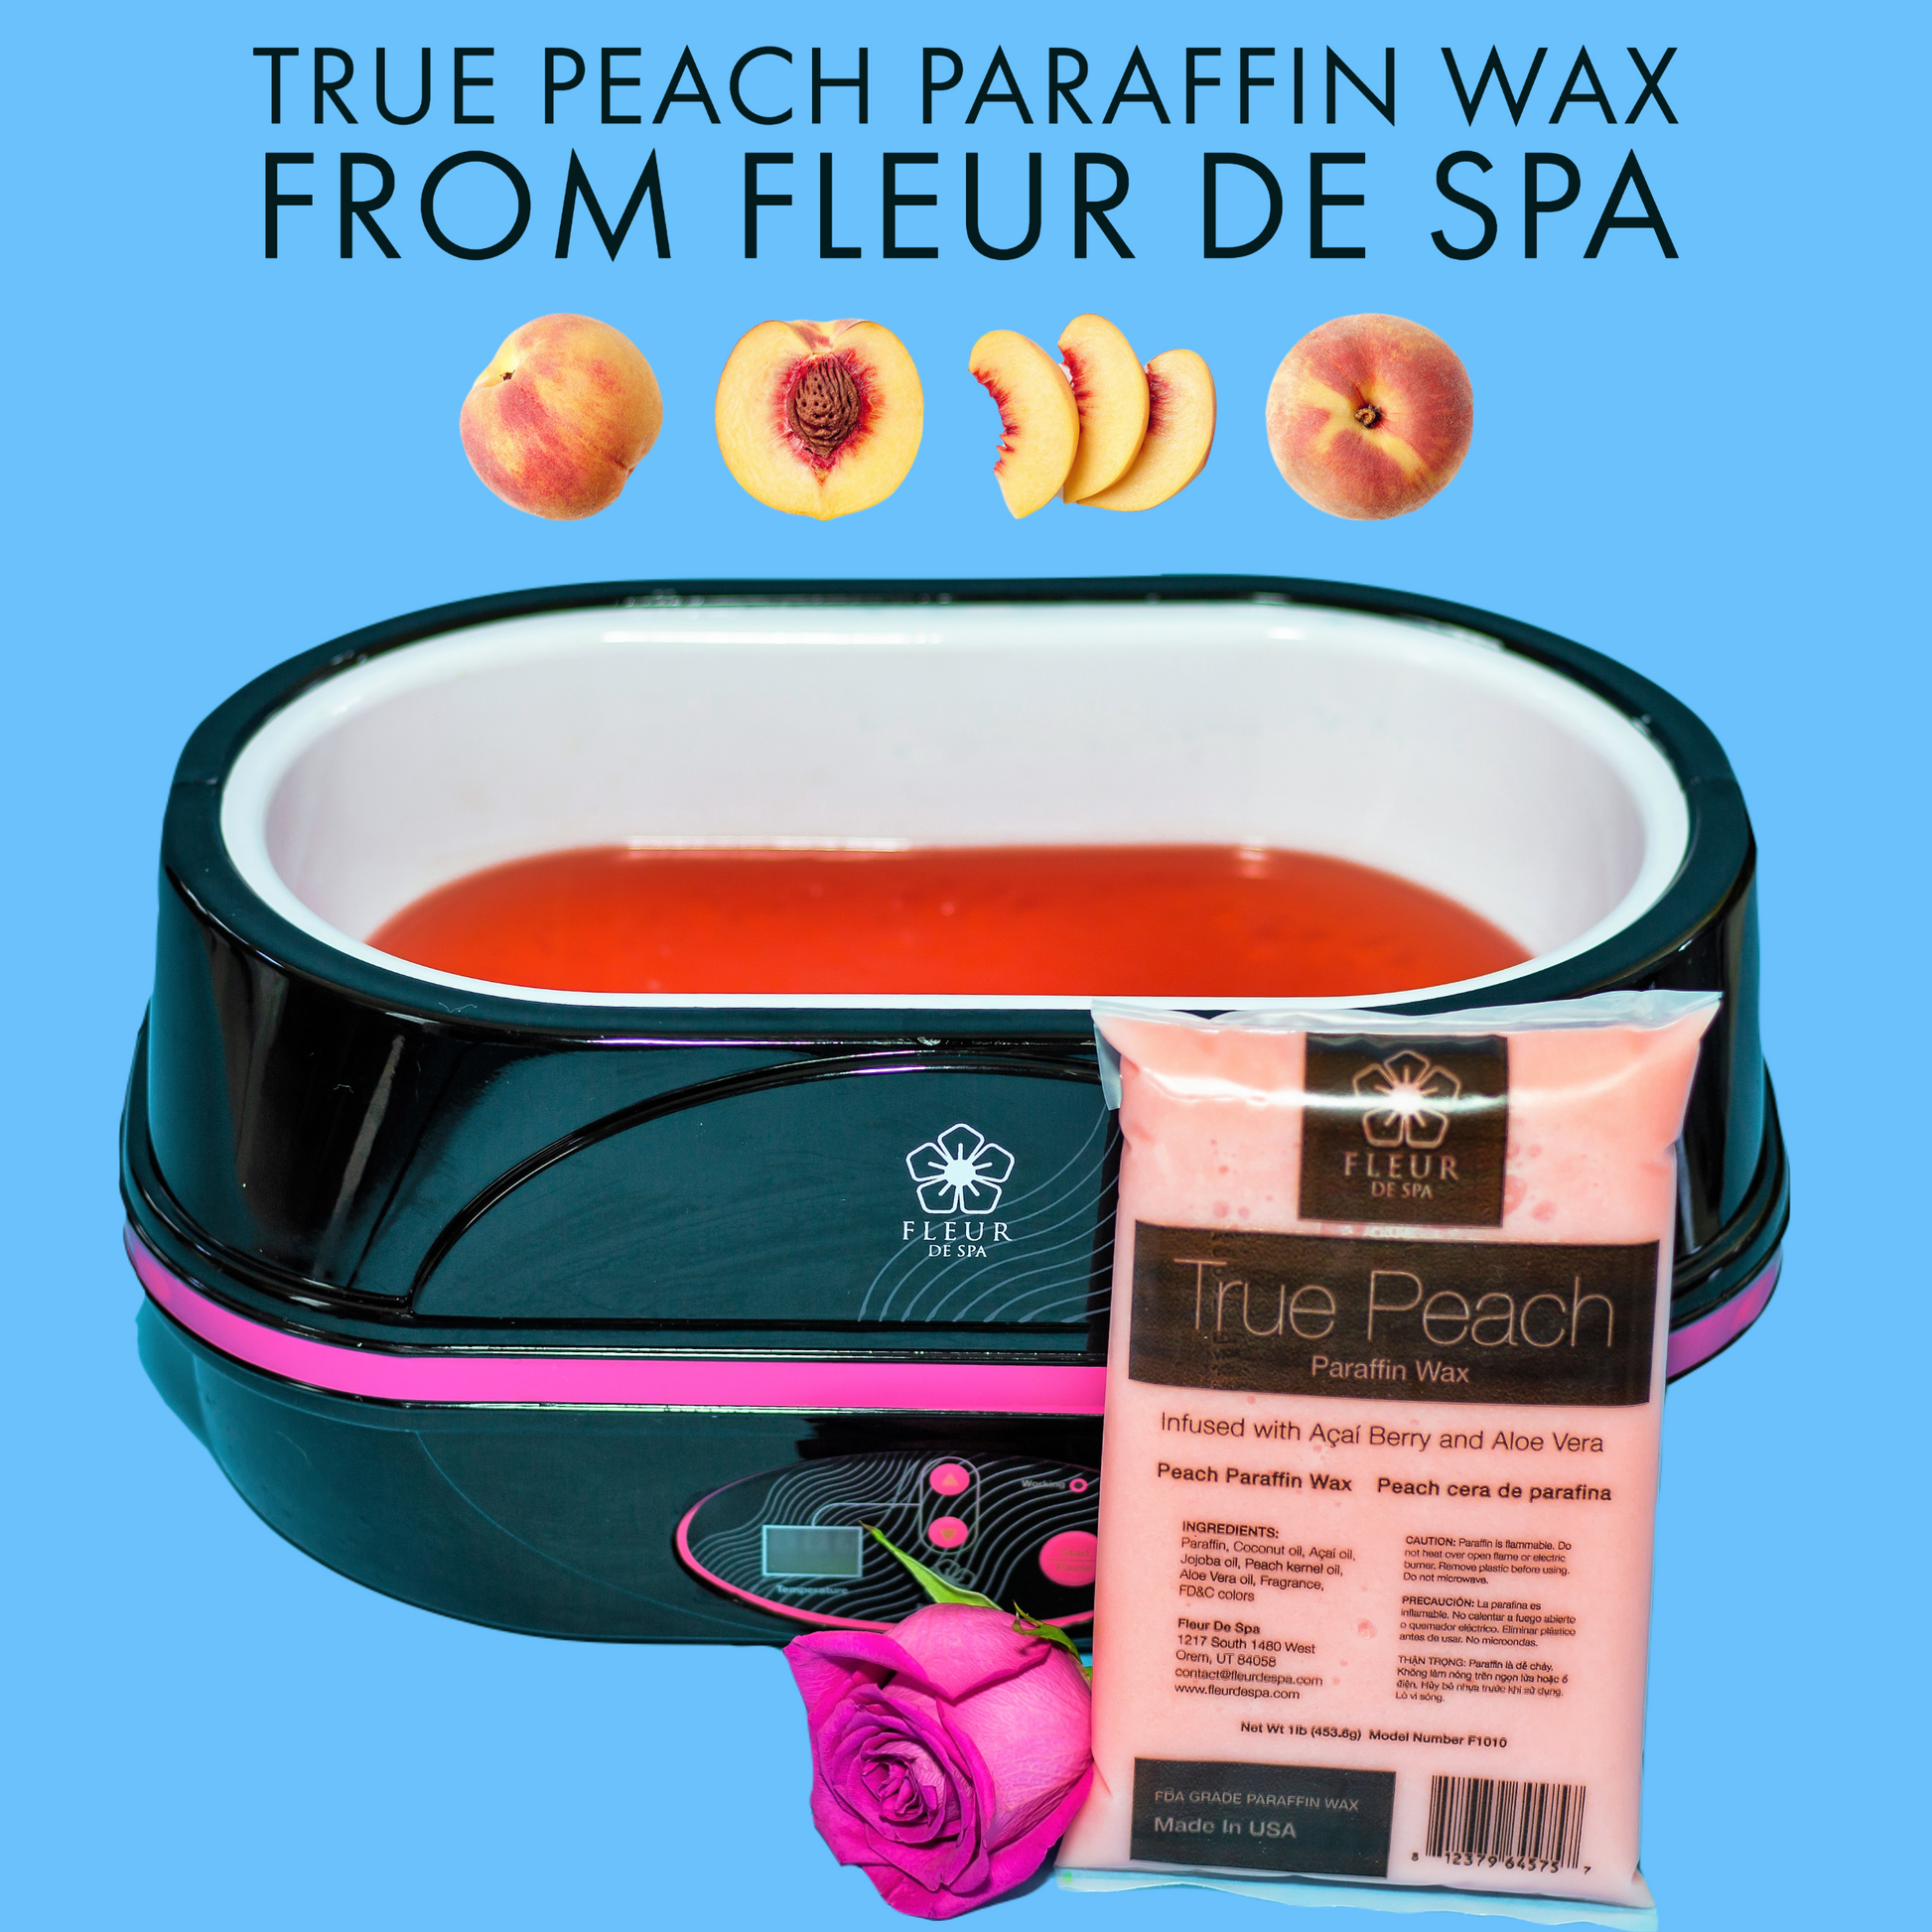 Paraffin Wax Refills by Creation: Bulk 6 lbs of Lavender Paraffin Wax  Block, Use in Paraffin Wax Machine for hand and feet, Paraffin Wax Bath,  Relieve